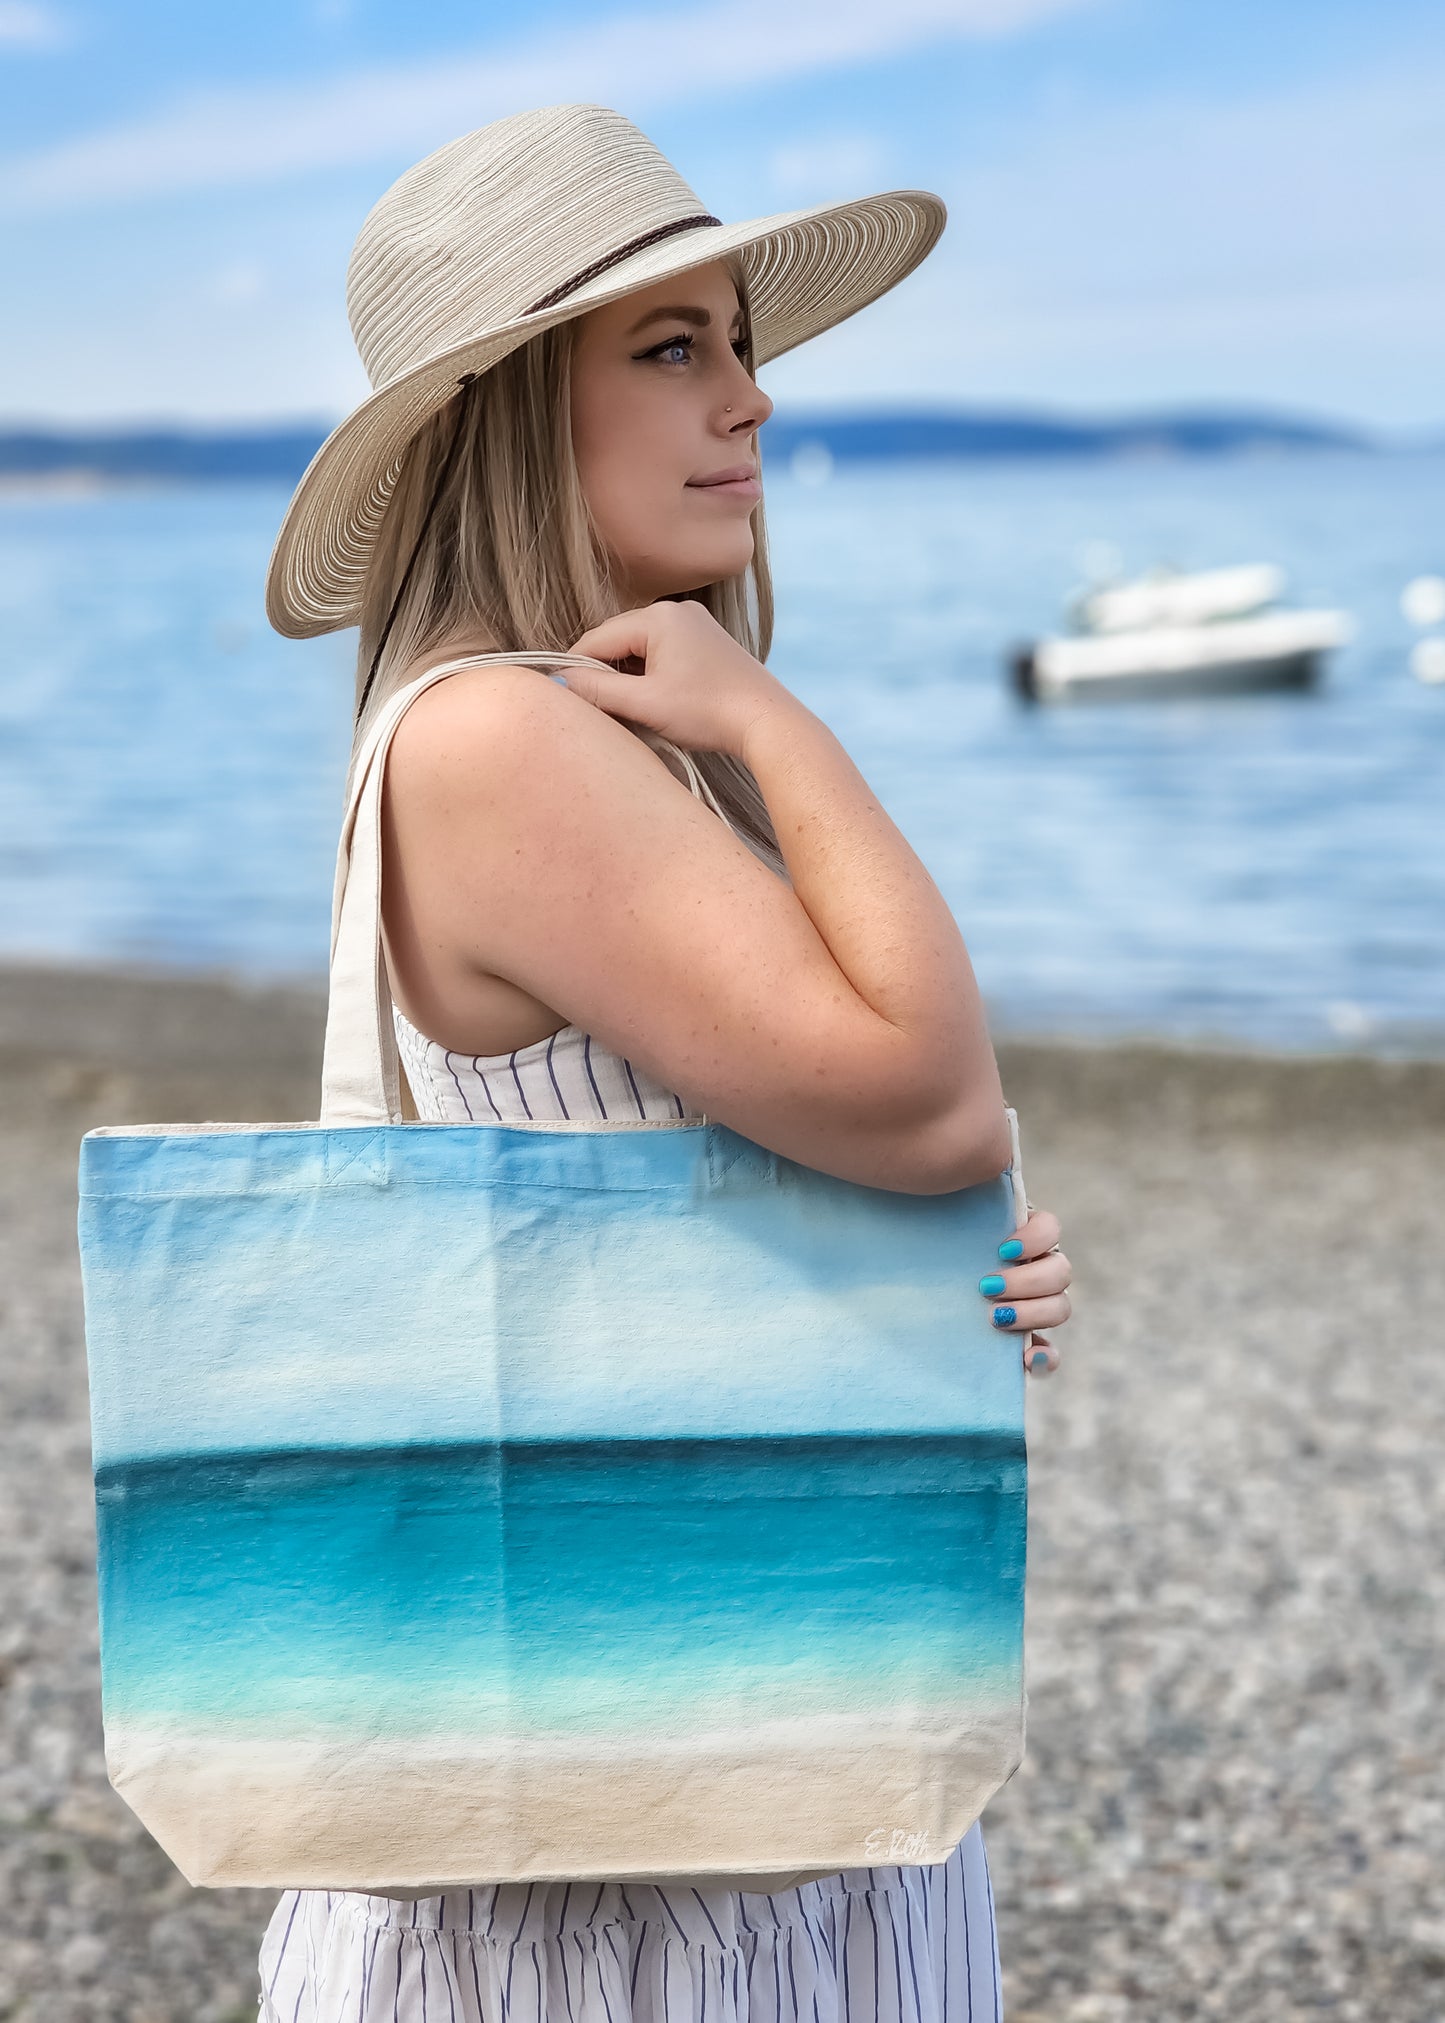 Hand Painted Canvas Tote #2